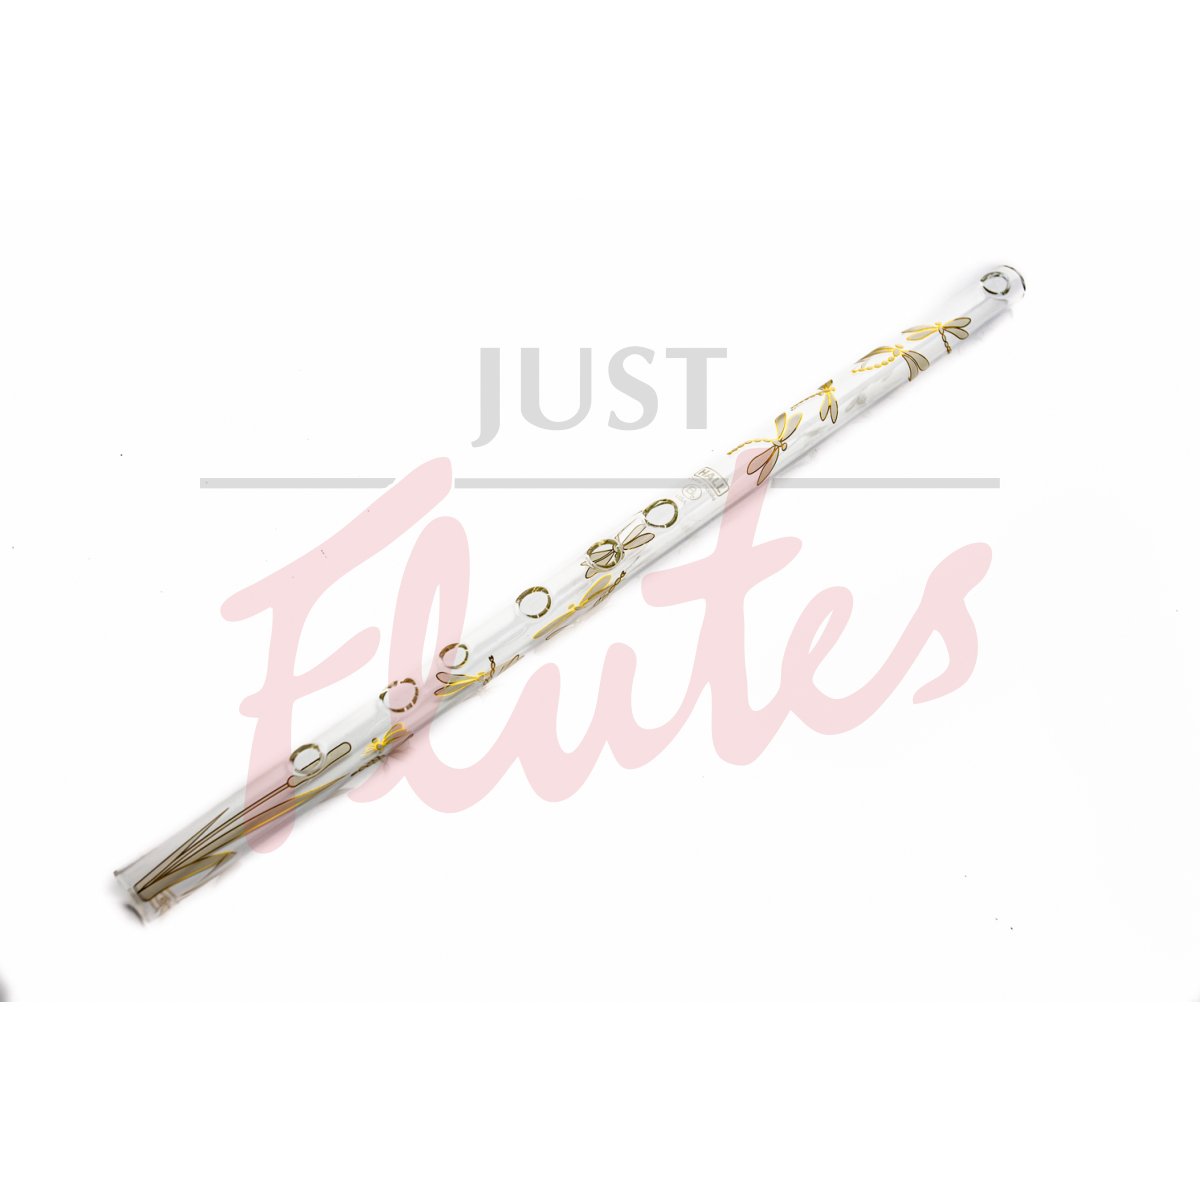 Hall 11403 Crystal Flute in Bb, Dragonfly